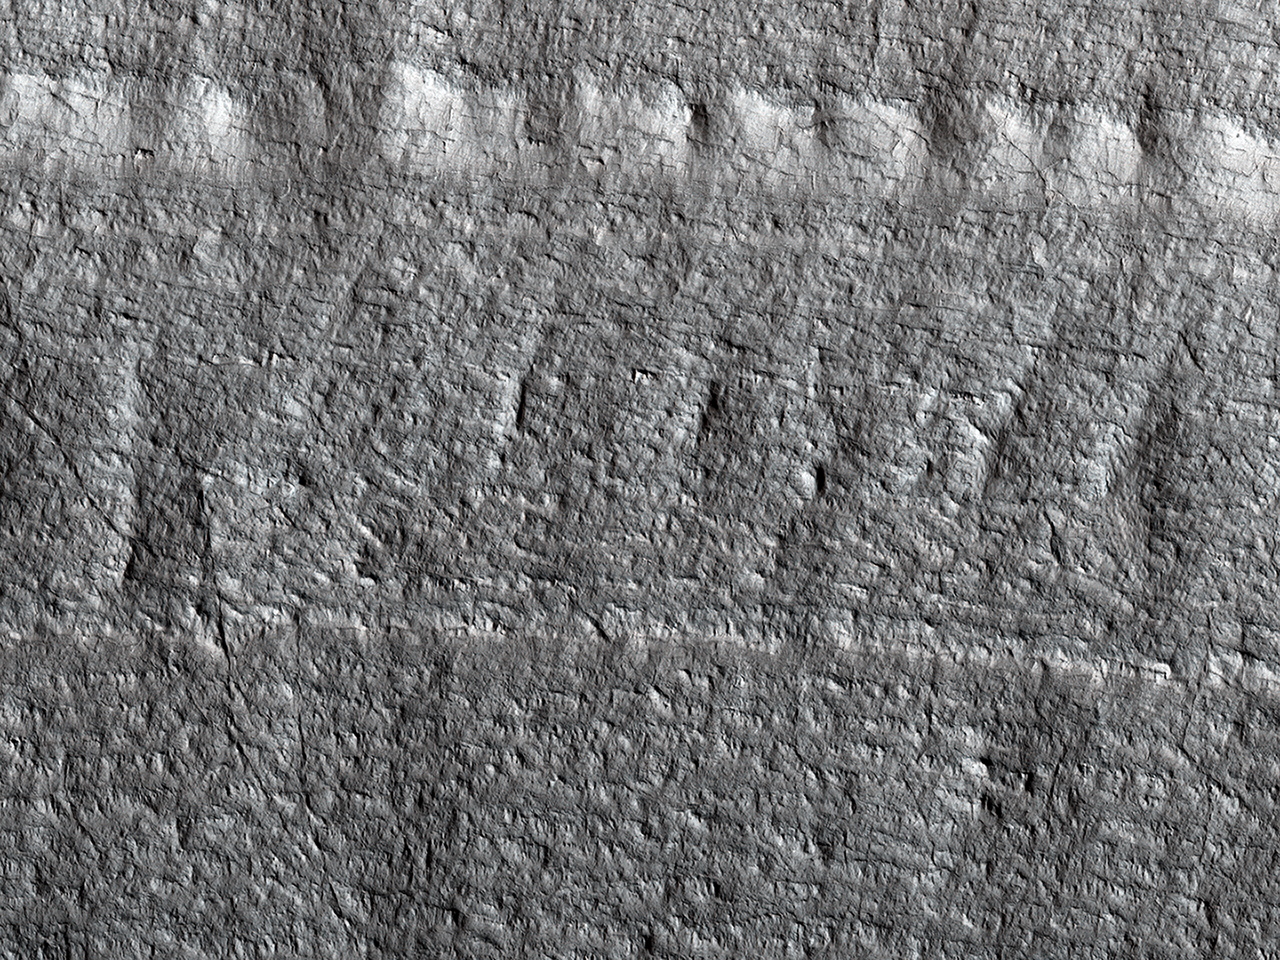 Layered Ice near the South Pole of Mars